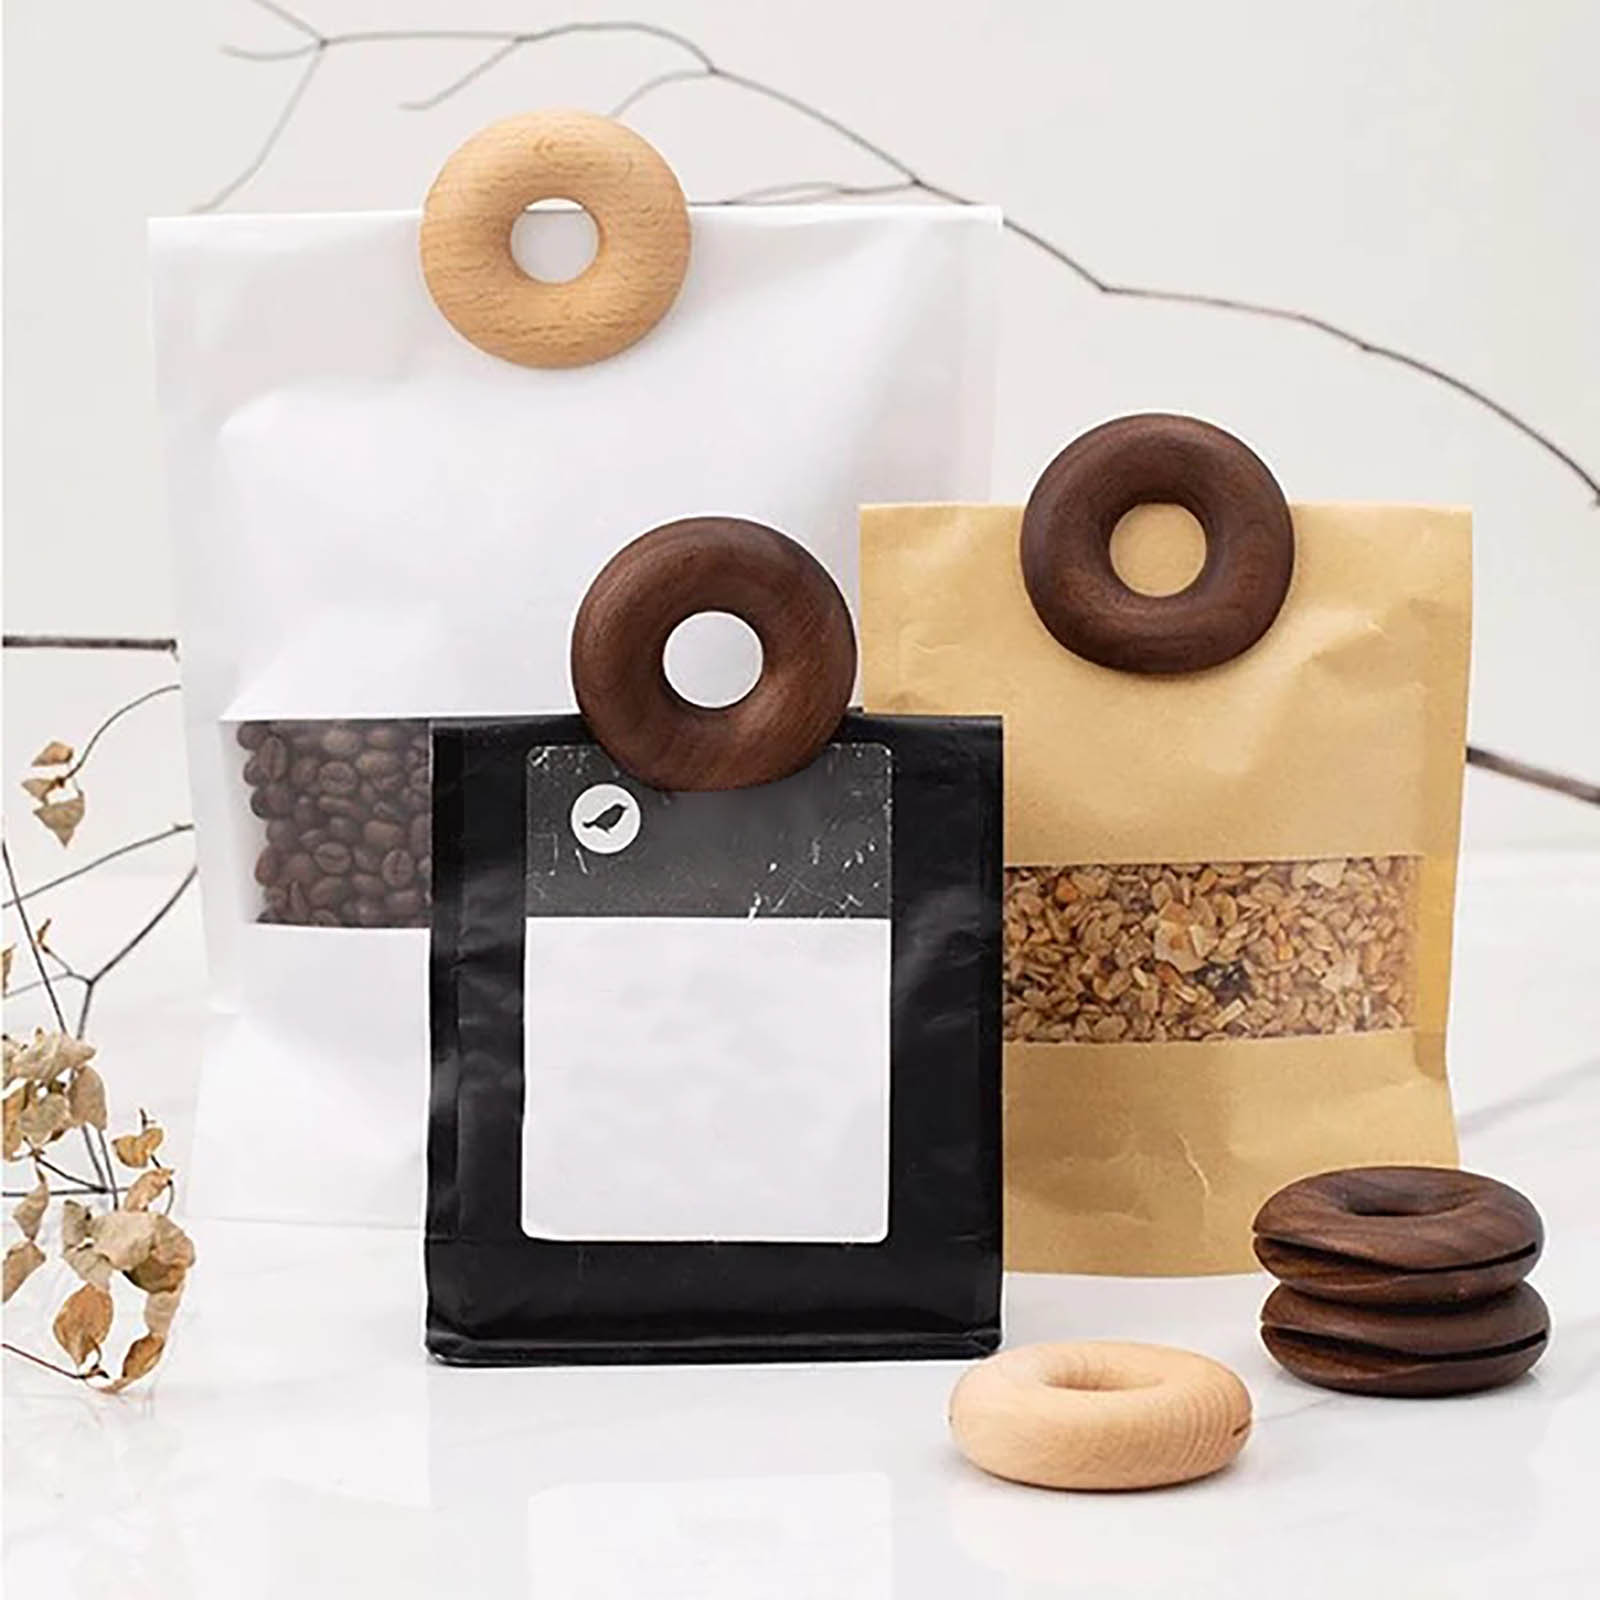 Garment Clips Wooden Donut Sealing Clip Environmental Protection Kitchen Snack Sealing Clip Sewing Photo Paper Clamps Holder